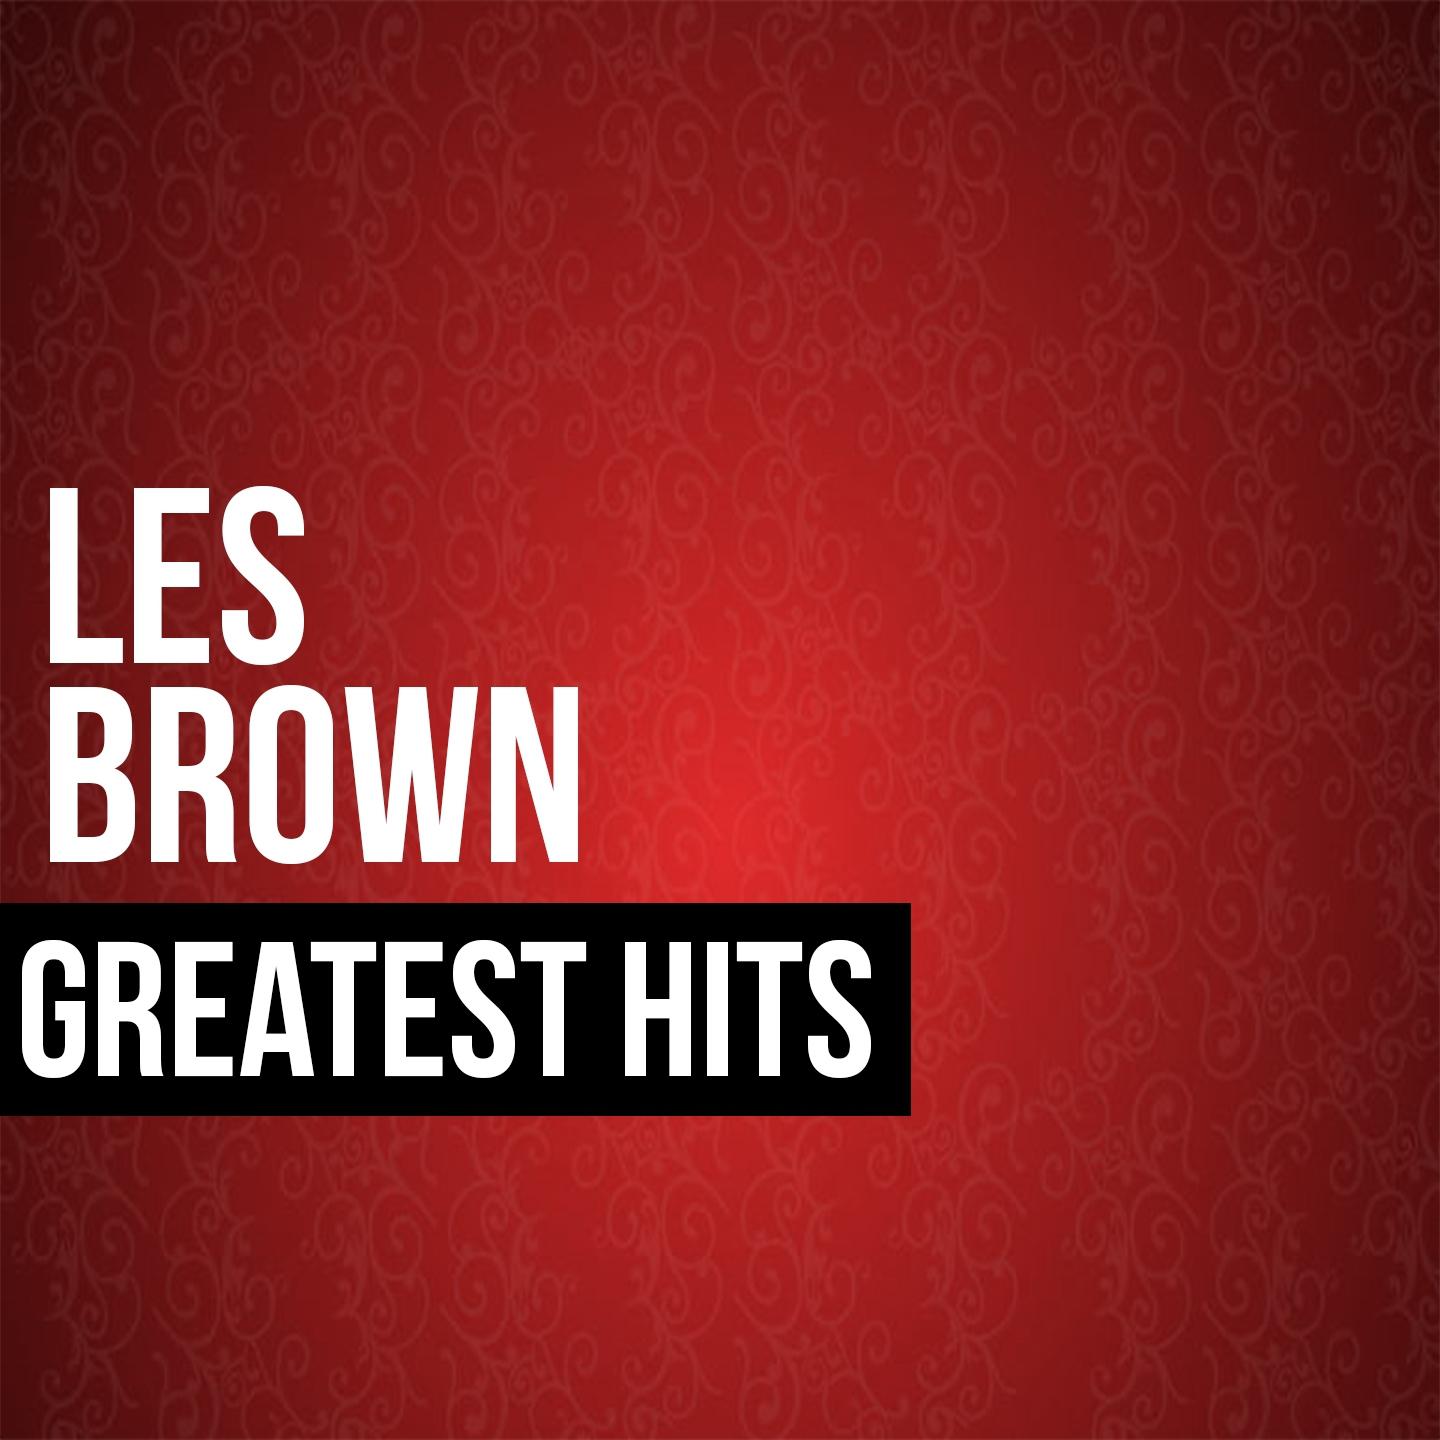 Les Brown Greatest Hits